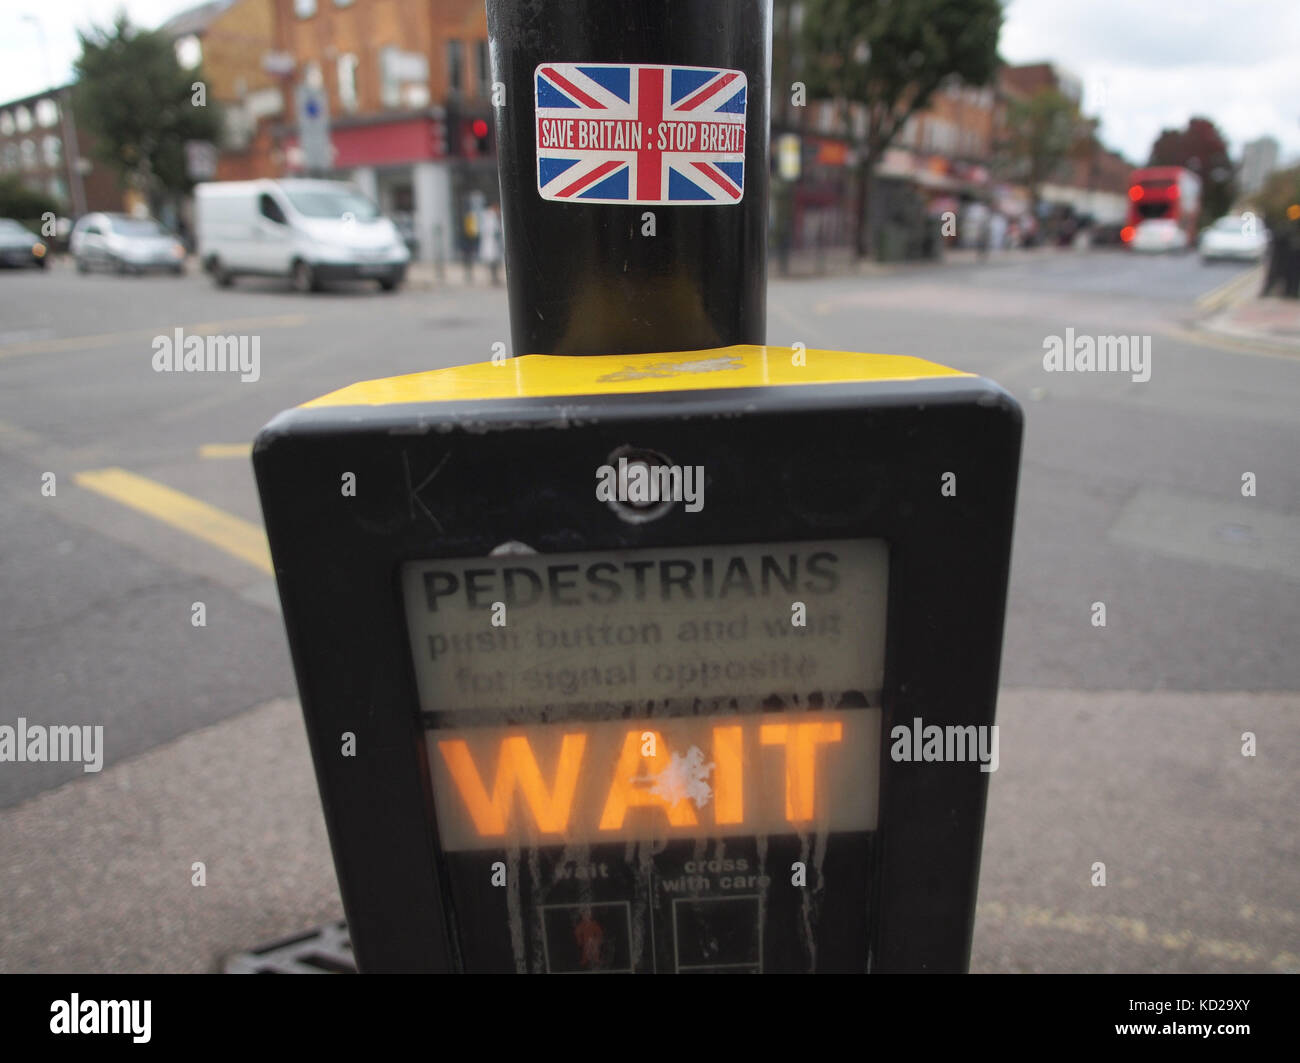 An anti-Brexit sticker placed on a traffic light pole, in London Stock  Photo - Alamy